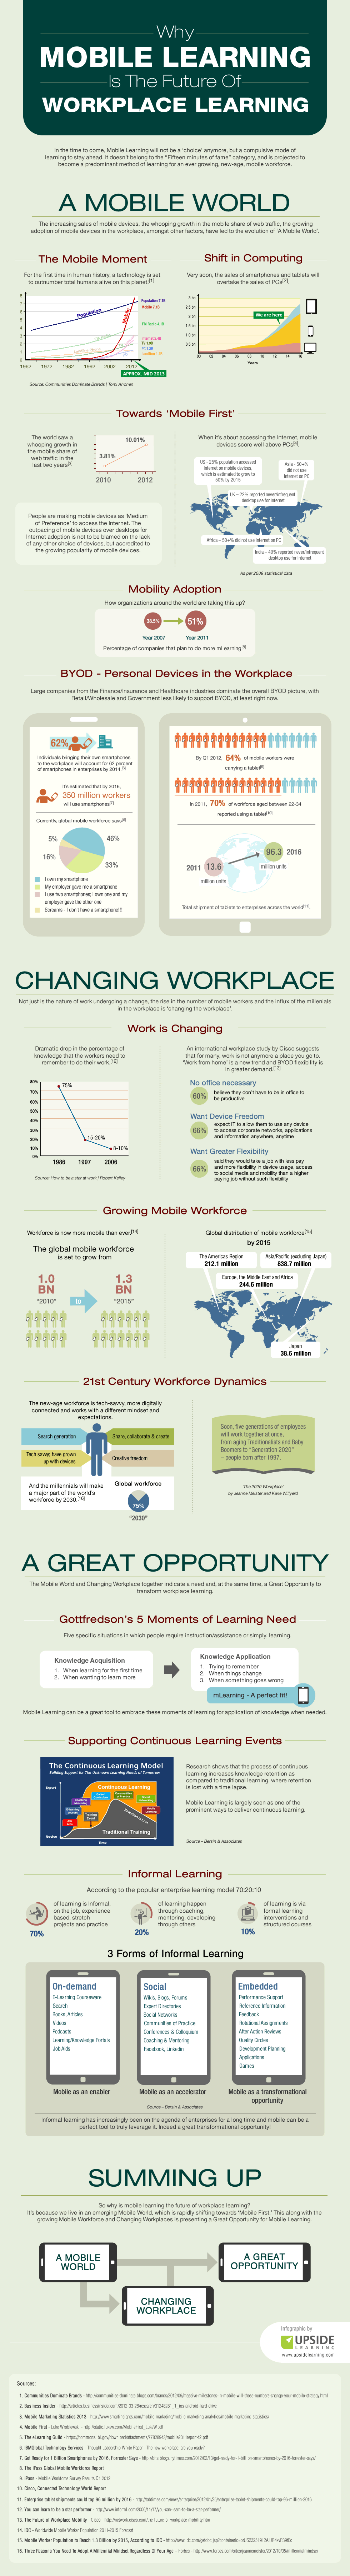 The-Future-Of-Workplace-Learning-is-Mobile-Infographic